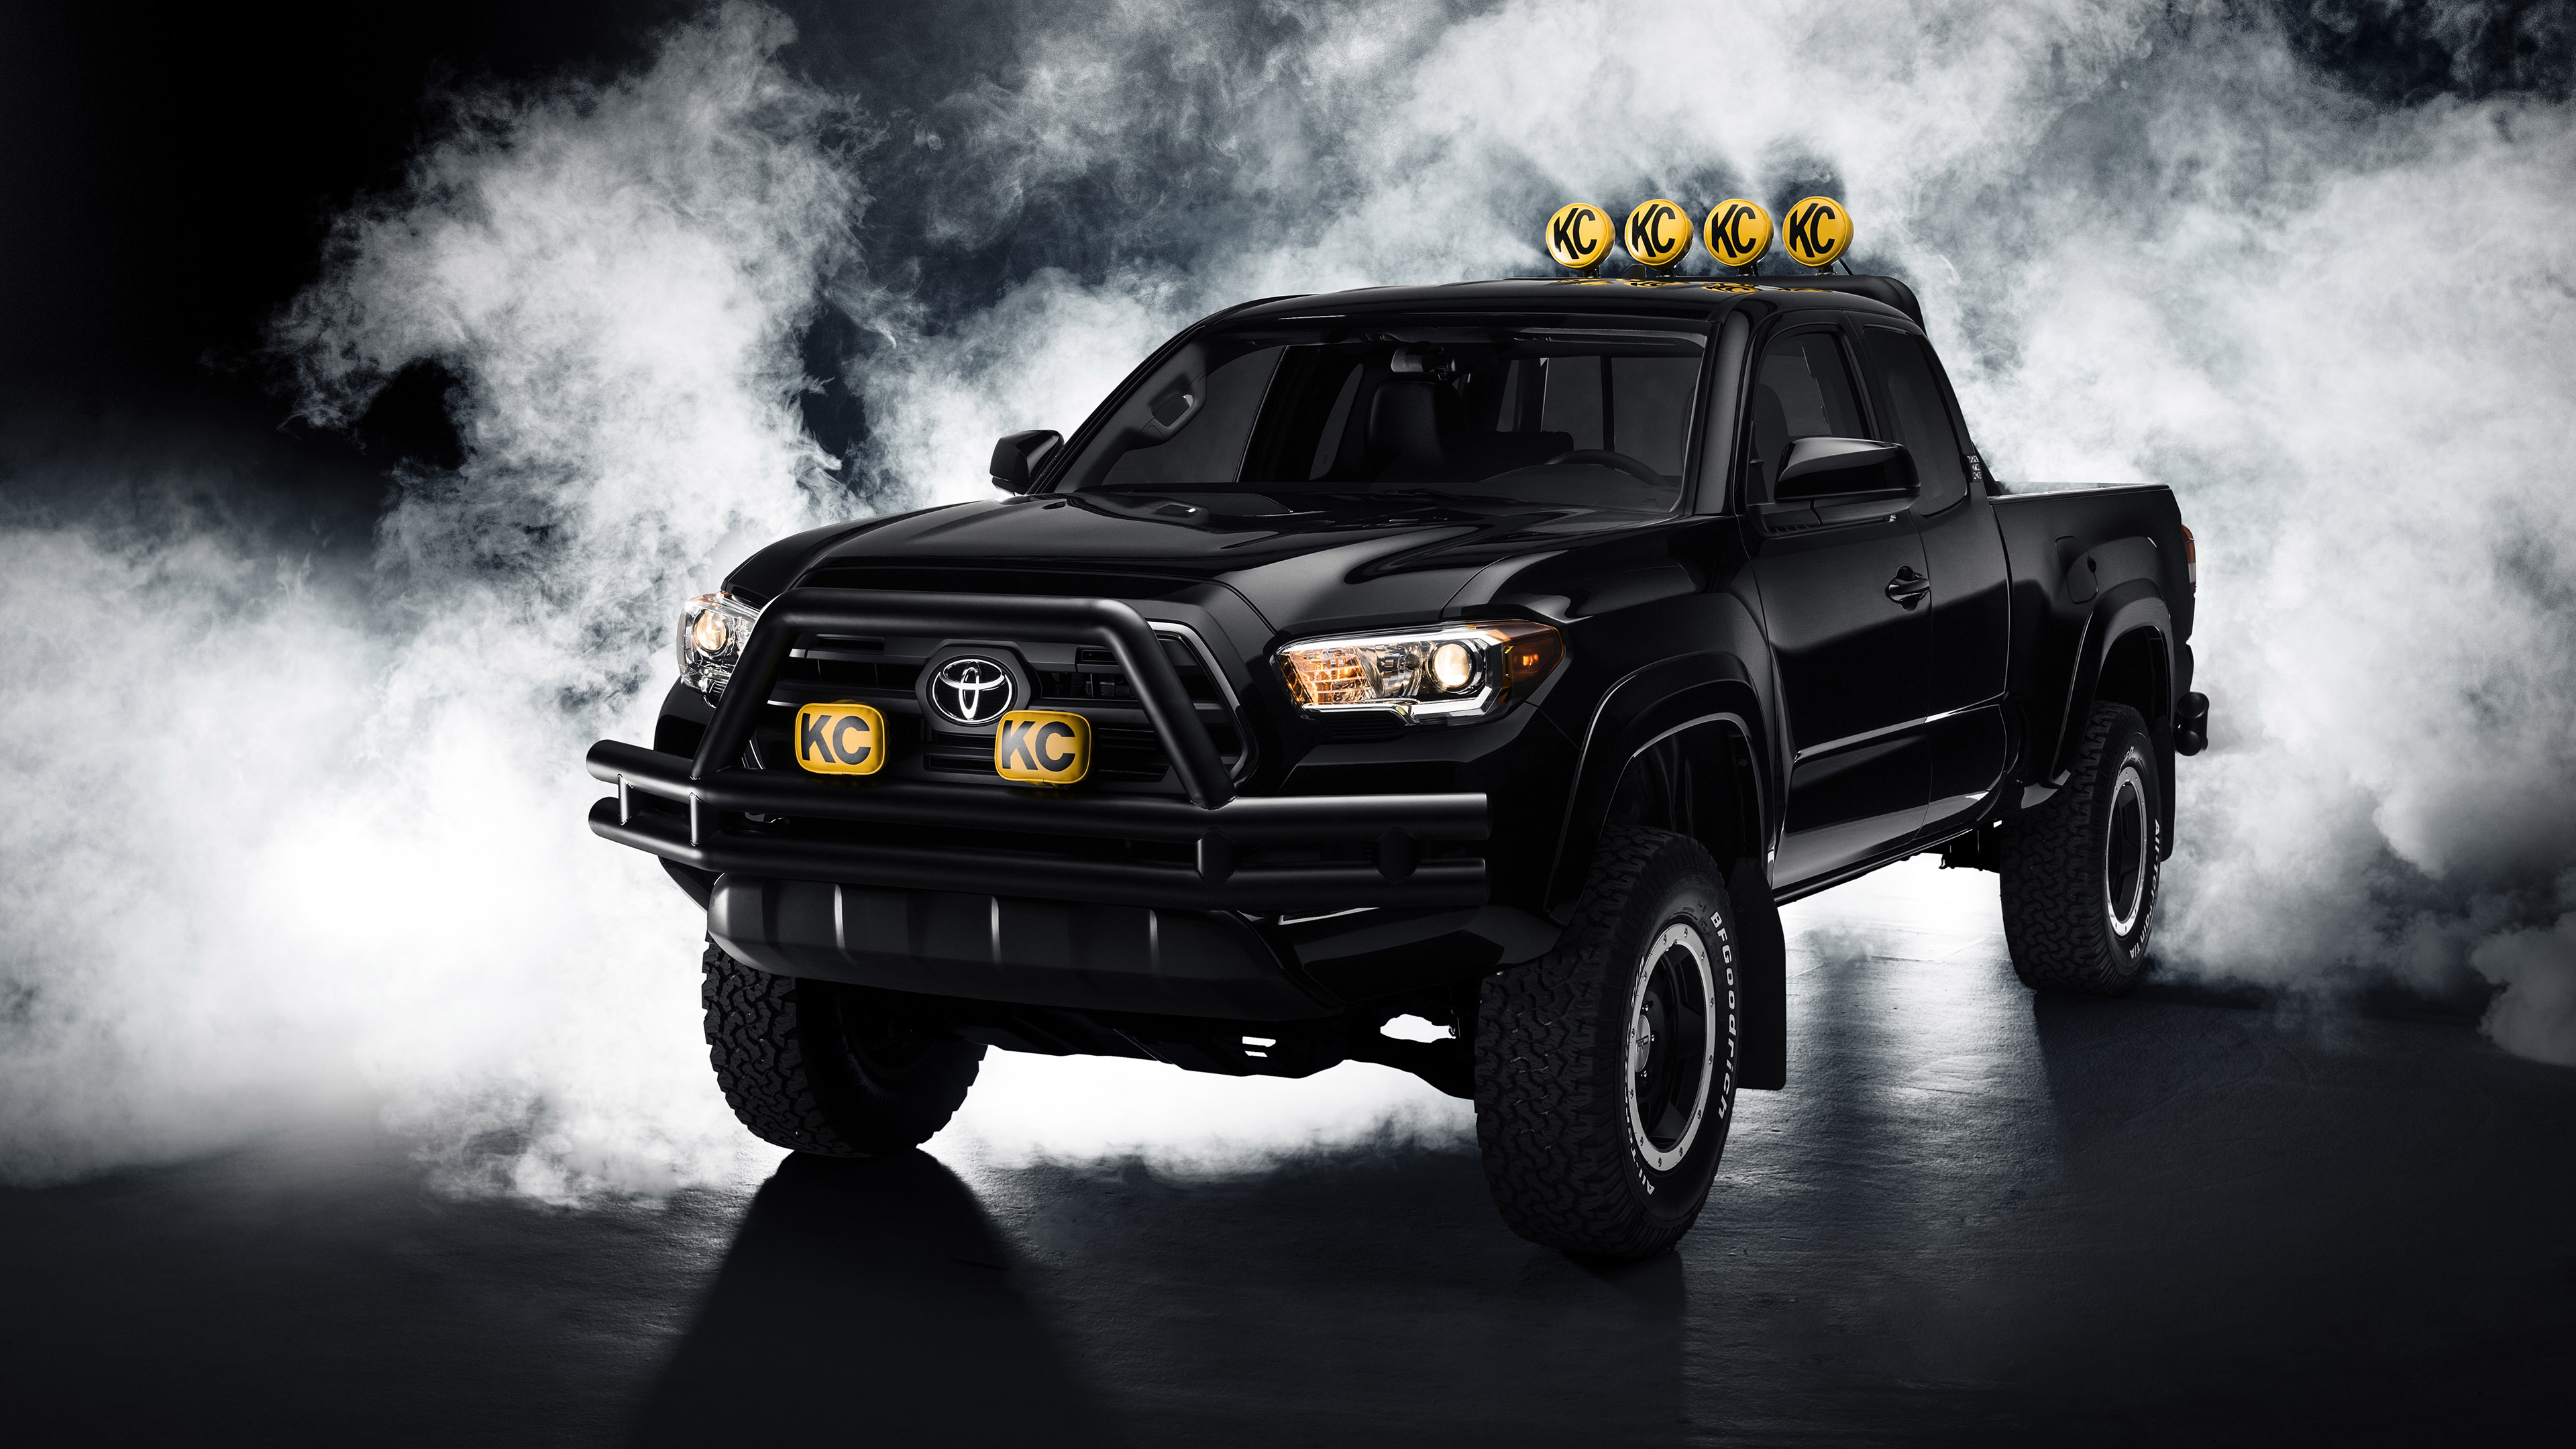  2016 Toyota Tacoma \'Back to the Future\' Concept Wallpaper.